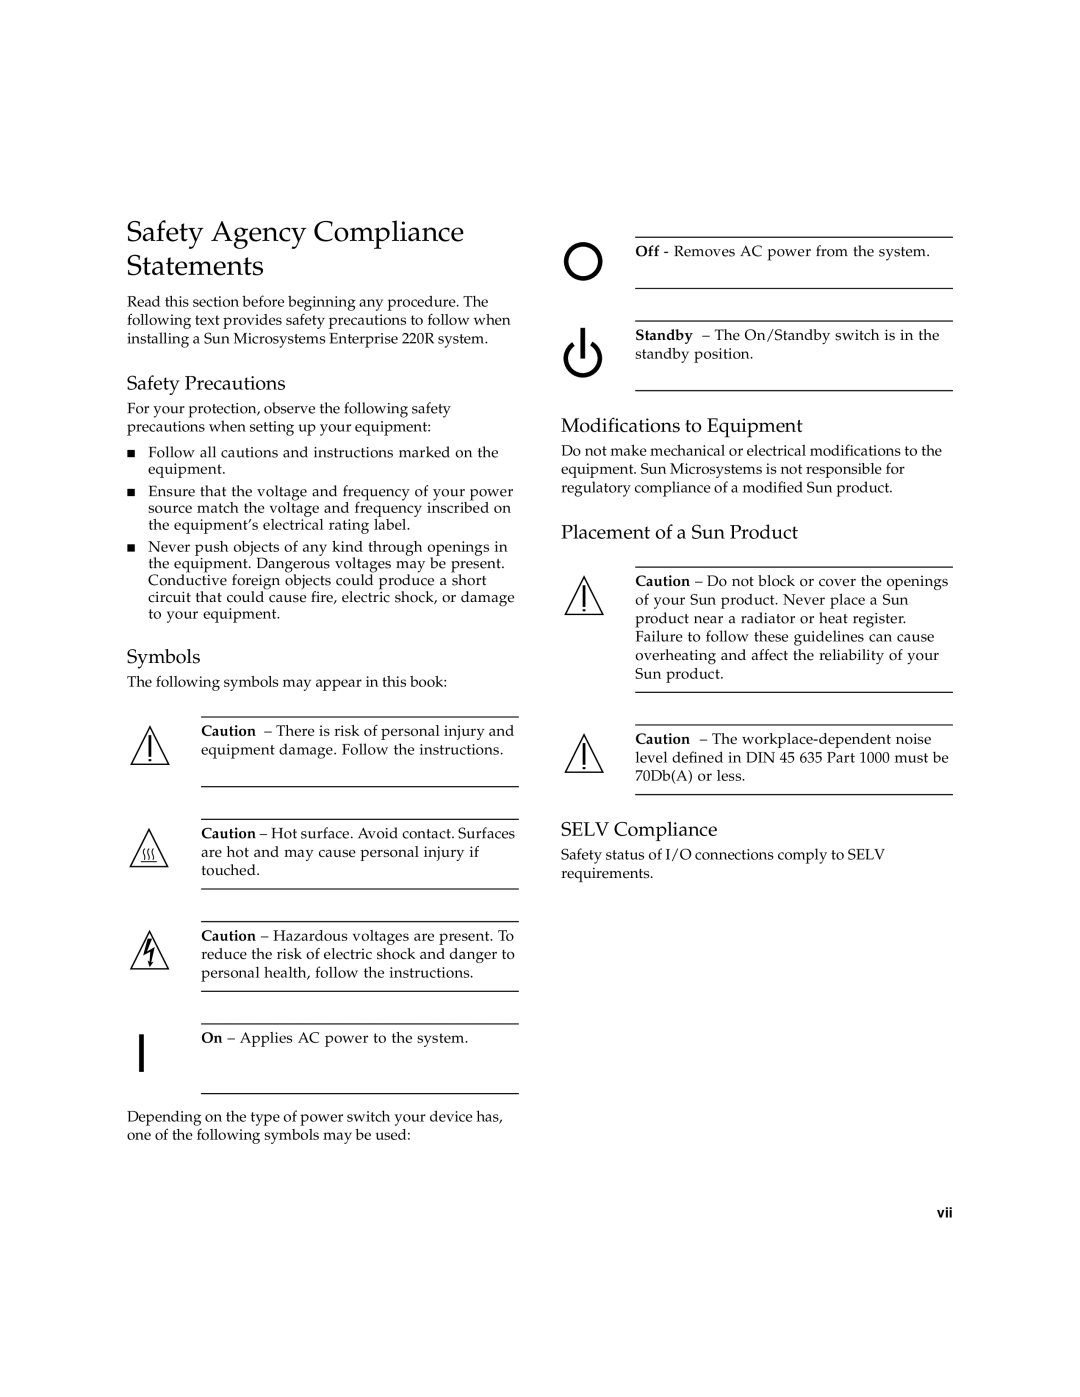 Sun Microsystems 220R manual Safety Agency Compliance Statements, Safety Precautions, Symbols, Modifications to Equipment 